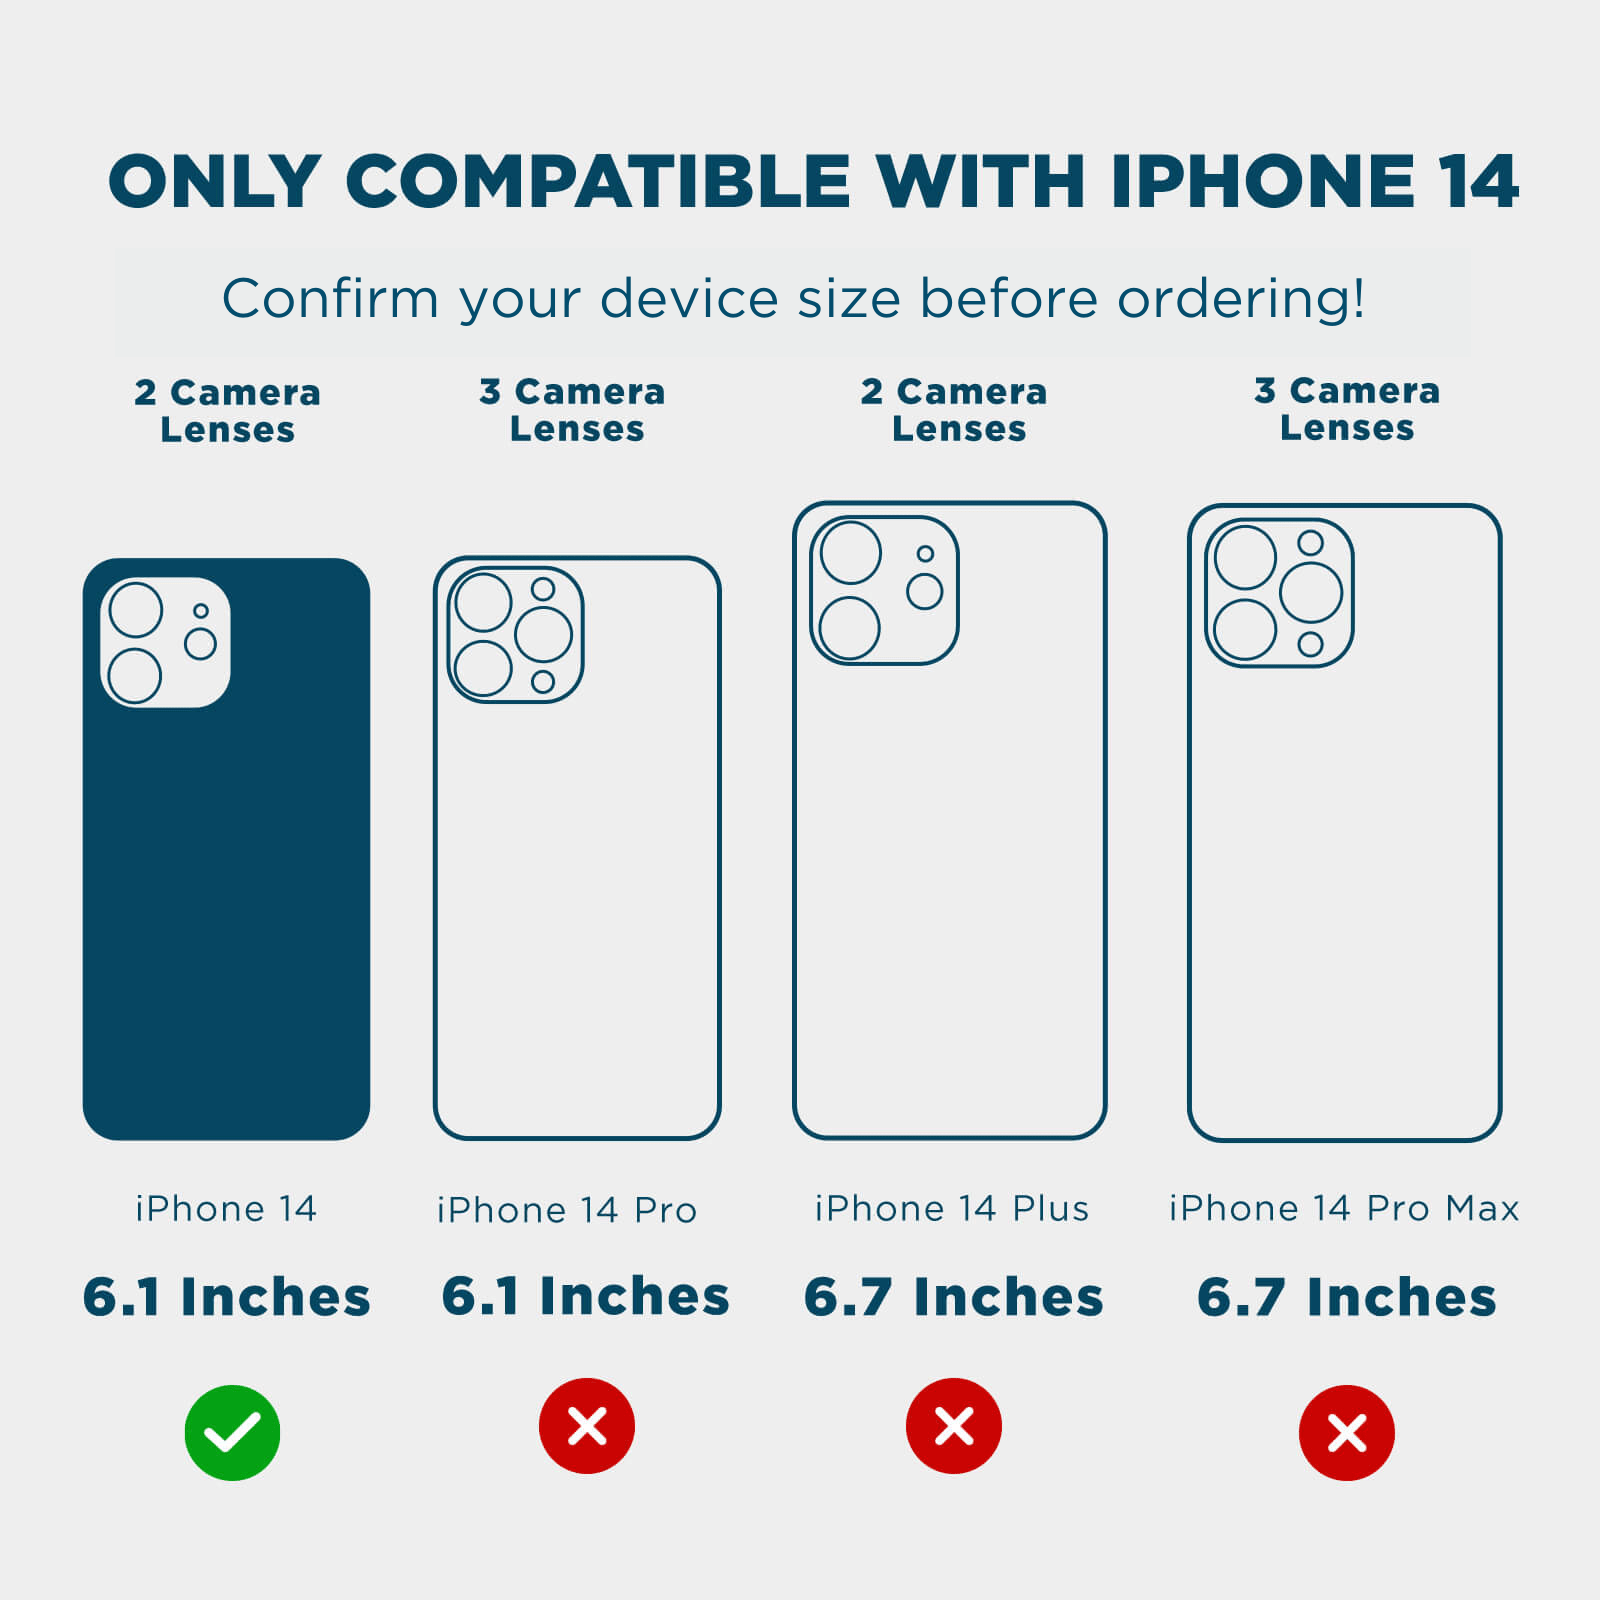 ONLY COMPATIBLE WITH IPHONE 14 CONFIRM YOUR DEVICE SIZE BEFORE ORDERING! 2 CAMERA LENSES, 3 CAMERA LENSES, 2 CAMERA LENSES, 3 CAMERA LENSES. IPHONE 14 6.1" IPHONE 14 PRO 6.1" IPHONE 14 PLUS 6.7" IPHONE 14 PRO MAX 6.7". COLOR::CLAY PINK